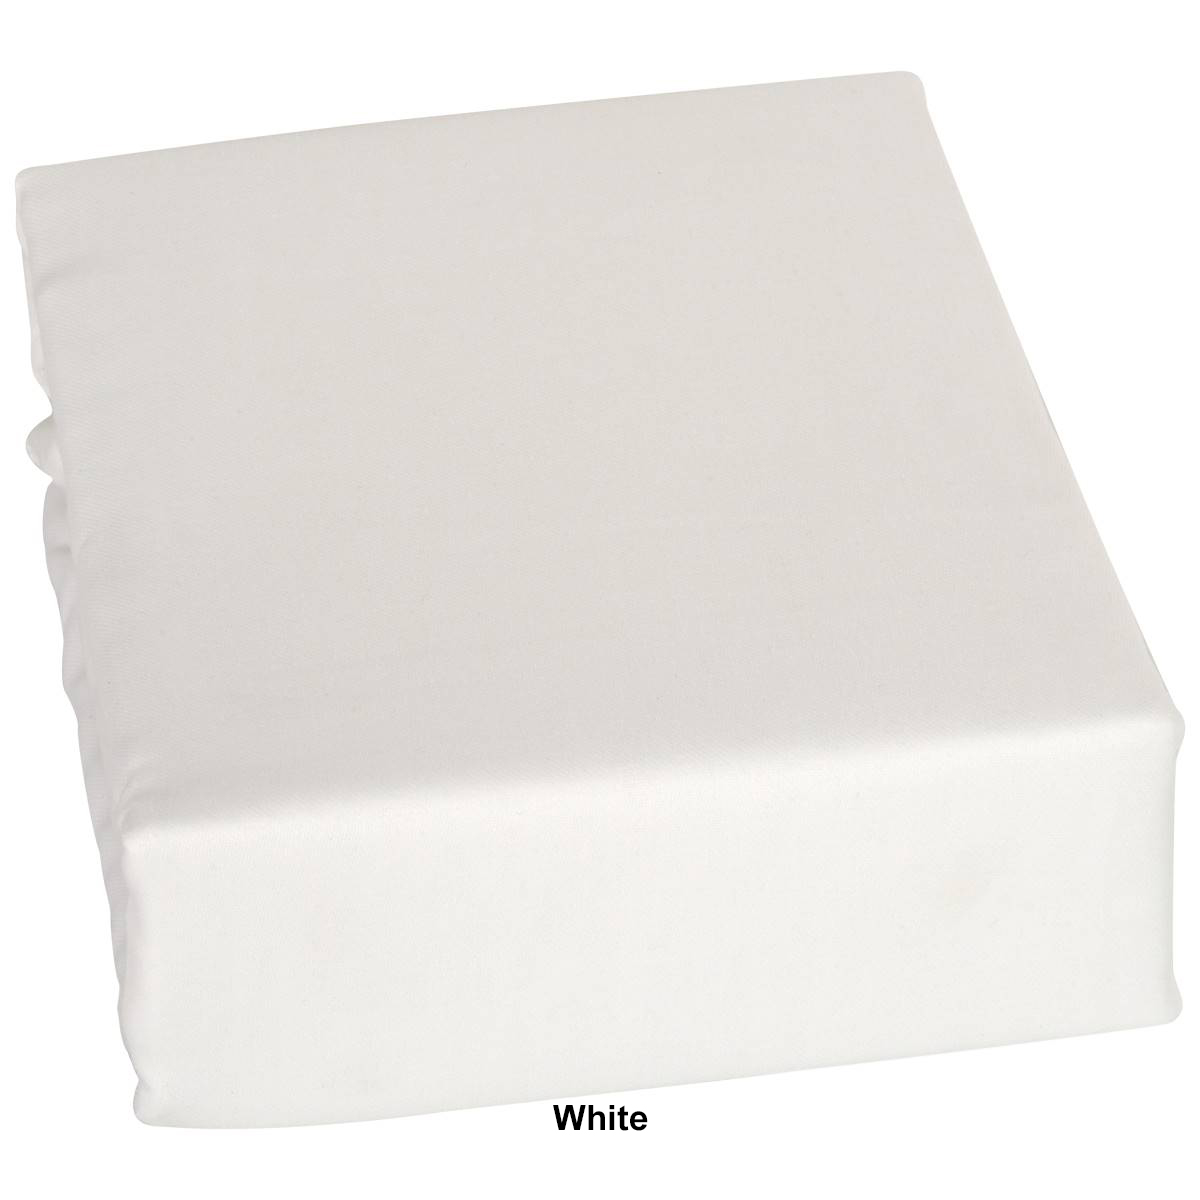 Ashley Cooper(tm) 200 Thread Count Fitted Sheet